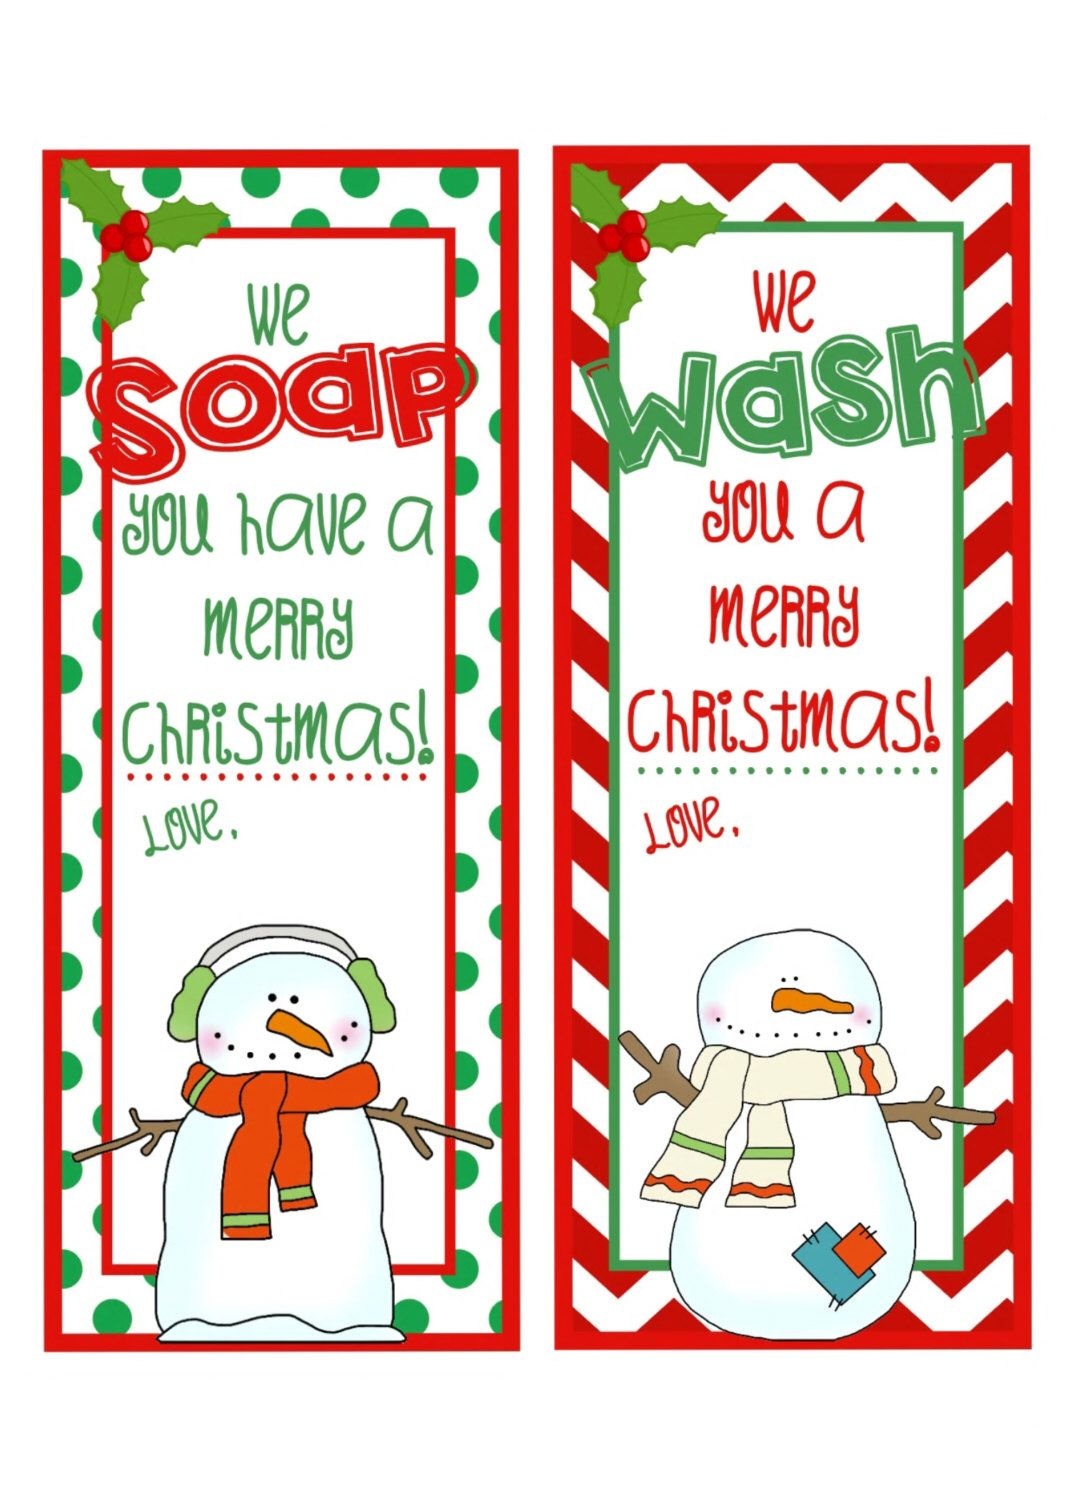 Pinkatie Gorman On Gifts And Decorations | Christmas Soap - We Wash You A Merry Christmas Free Printable